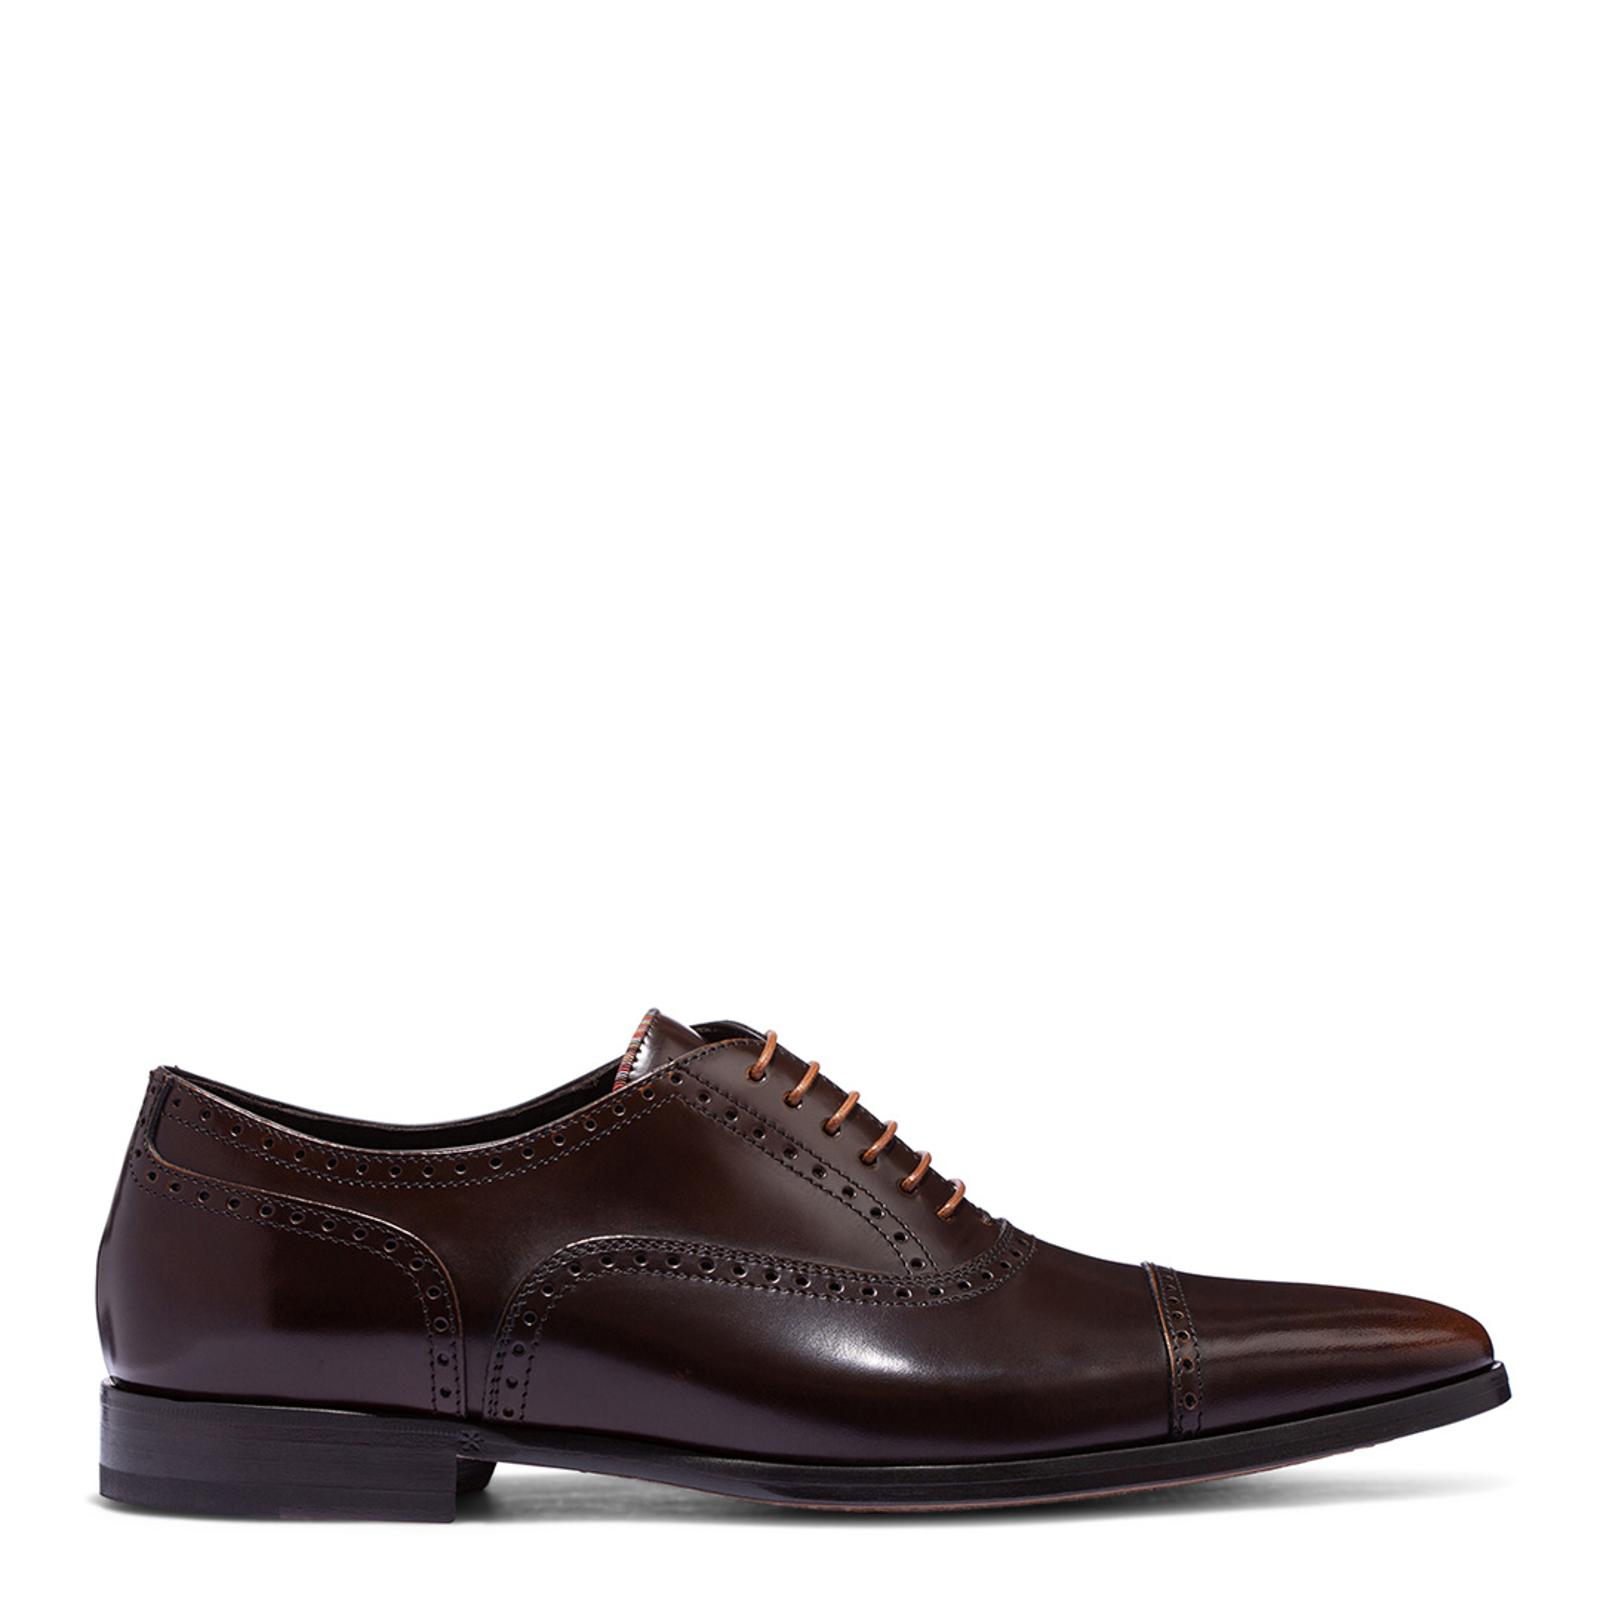 Brown Leather Shaw Brogues - BrandAlley